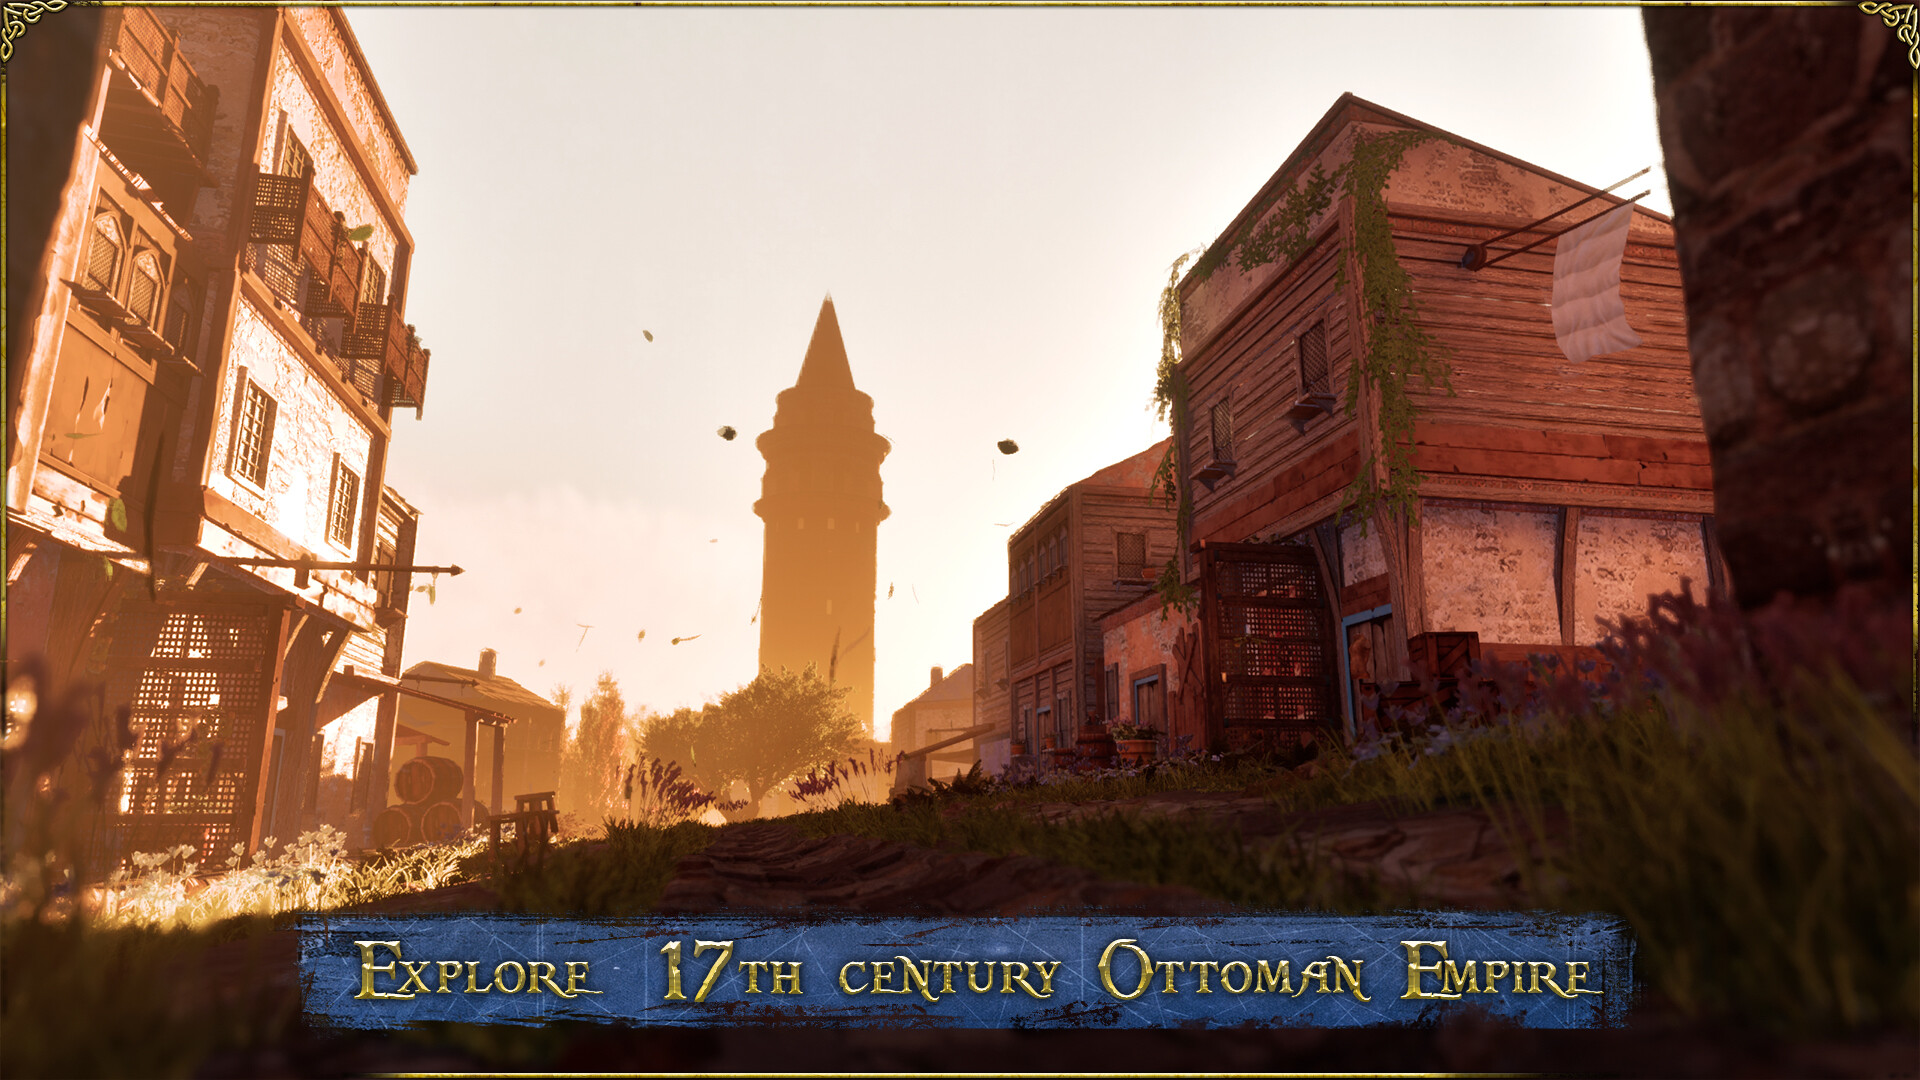 free Compass of Destiny: Istanbul for iphone download